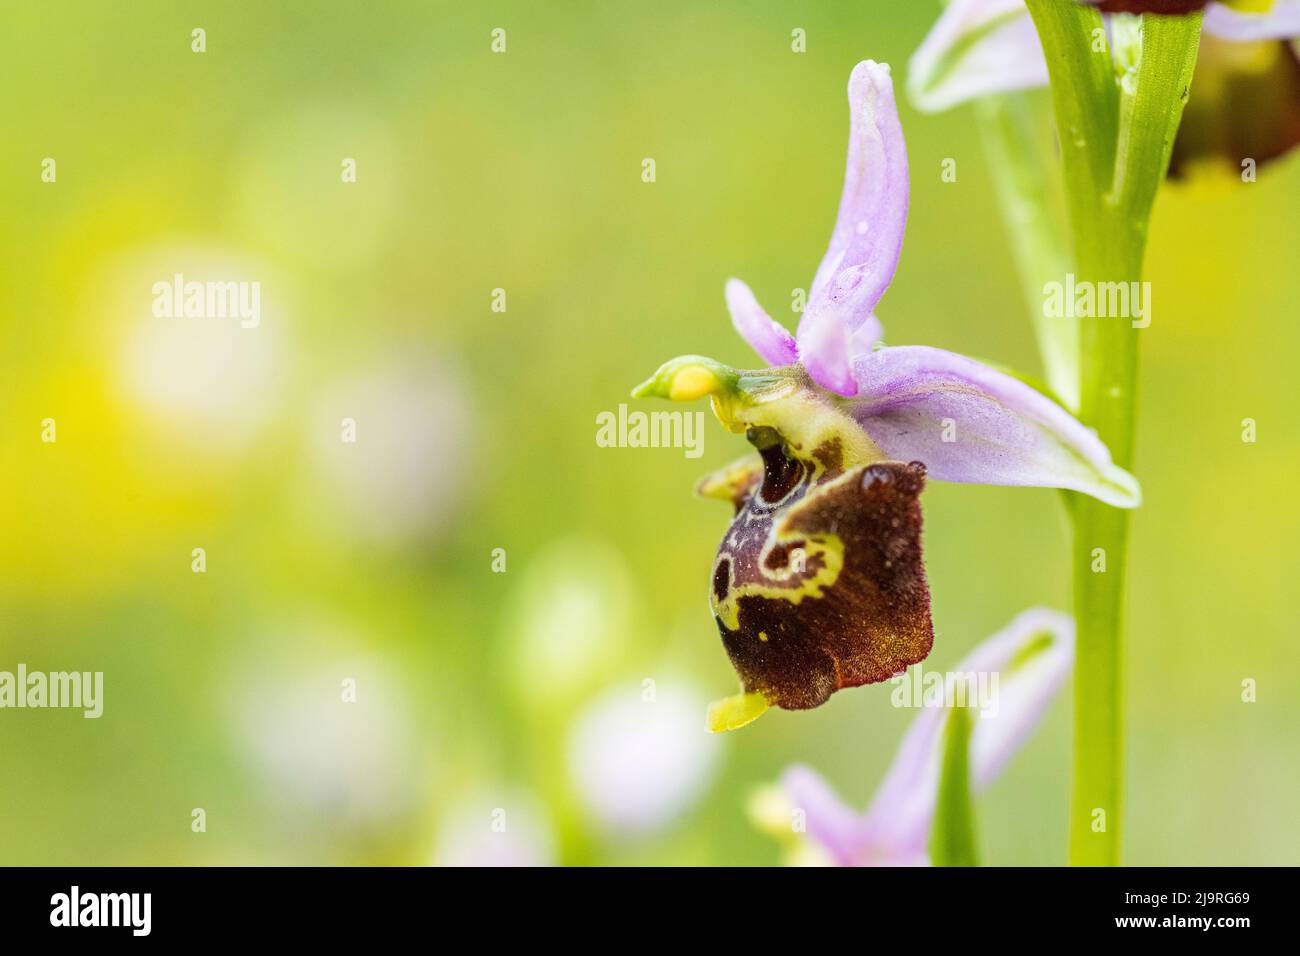 Ophrys holosericea, the late spider orchid, is a species of flowering plant in the family Orchidaceae. Stock Photo